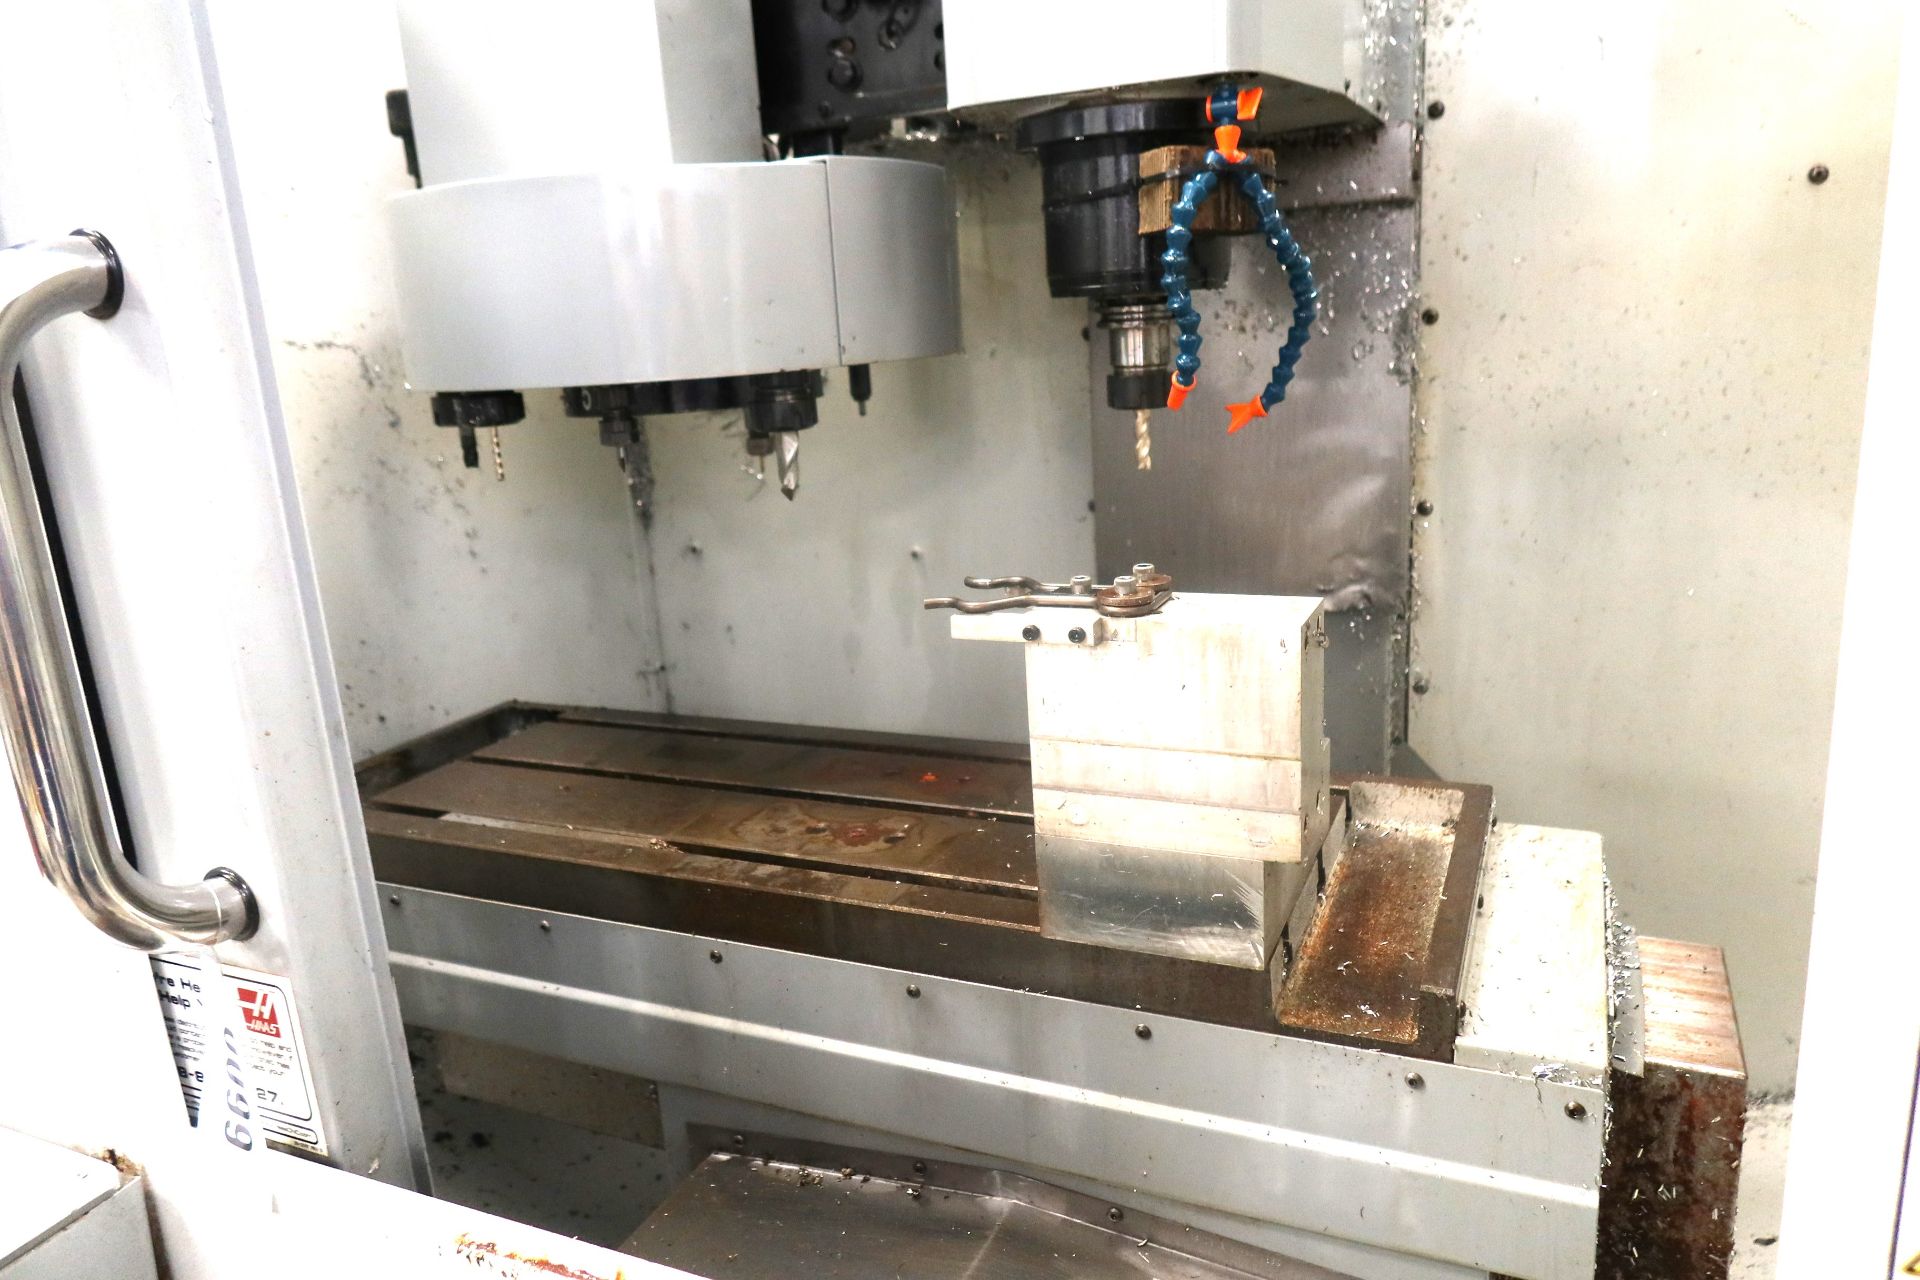 2006 Haas Mini Mill CNC 4-Axis Vertical Machining Center, SN 1053875 - Image 3 of 8